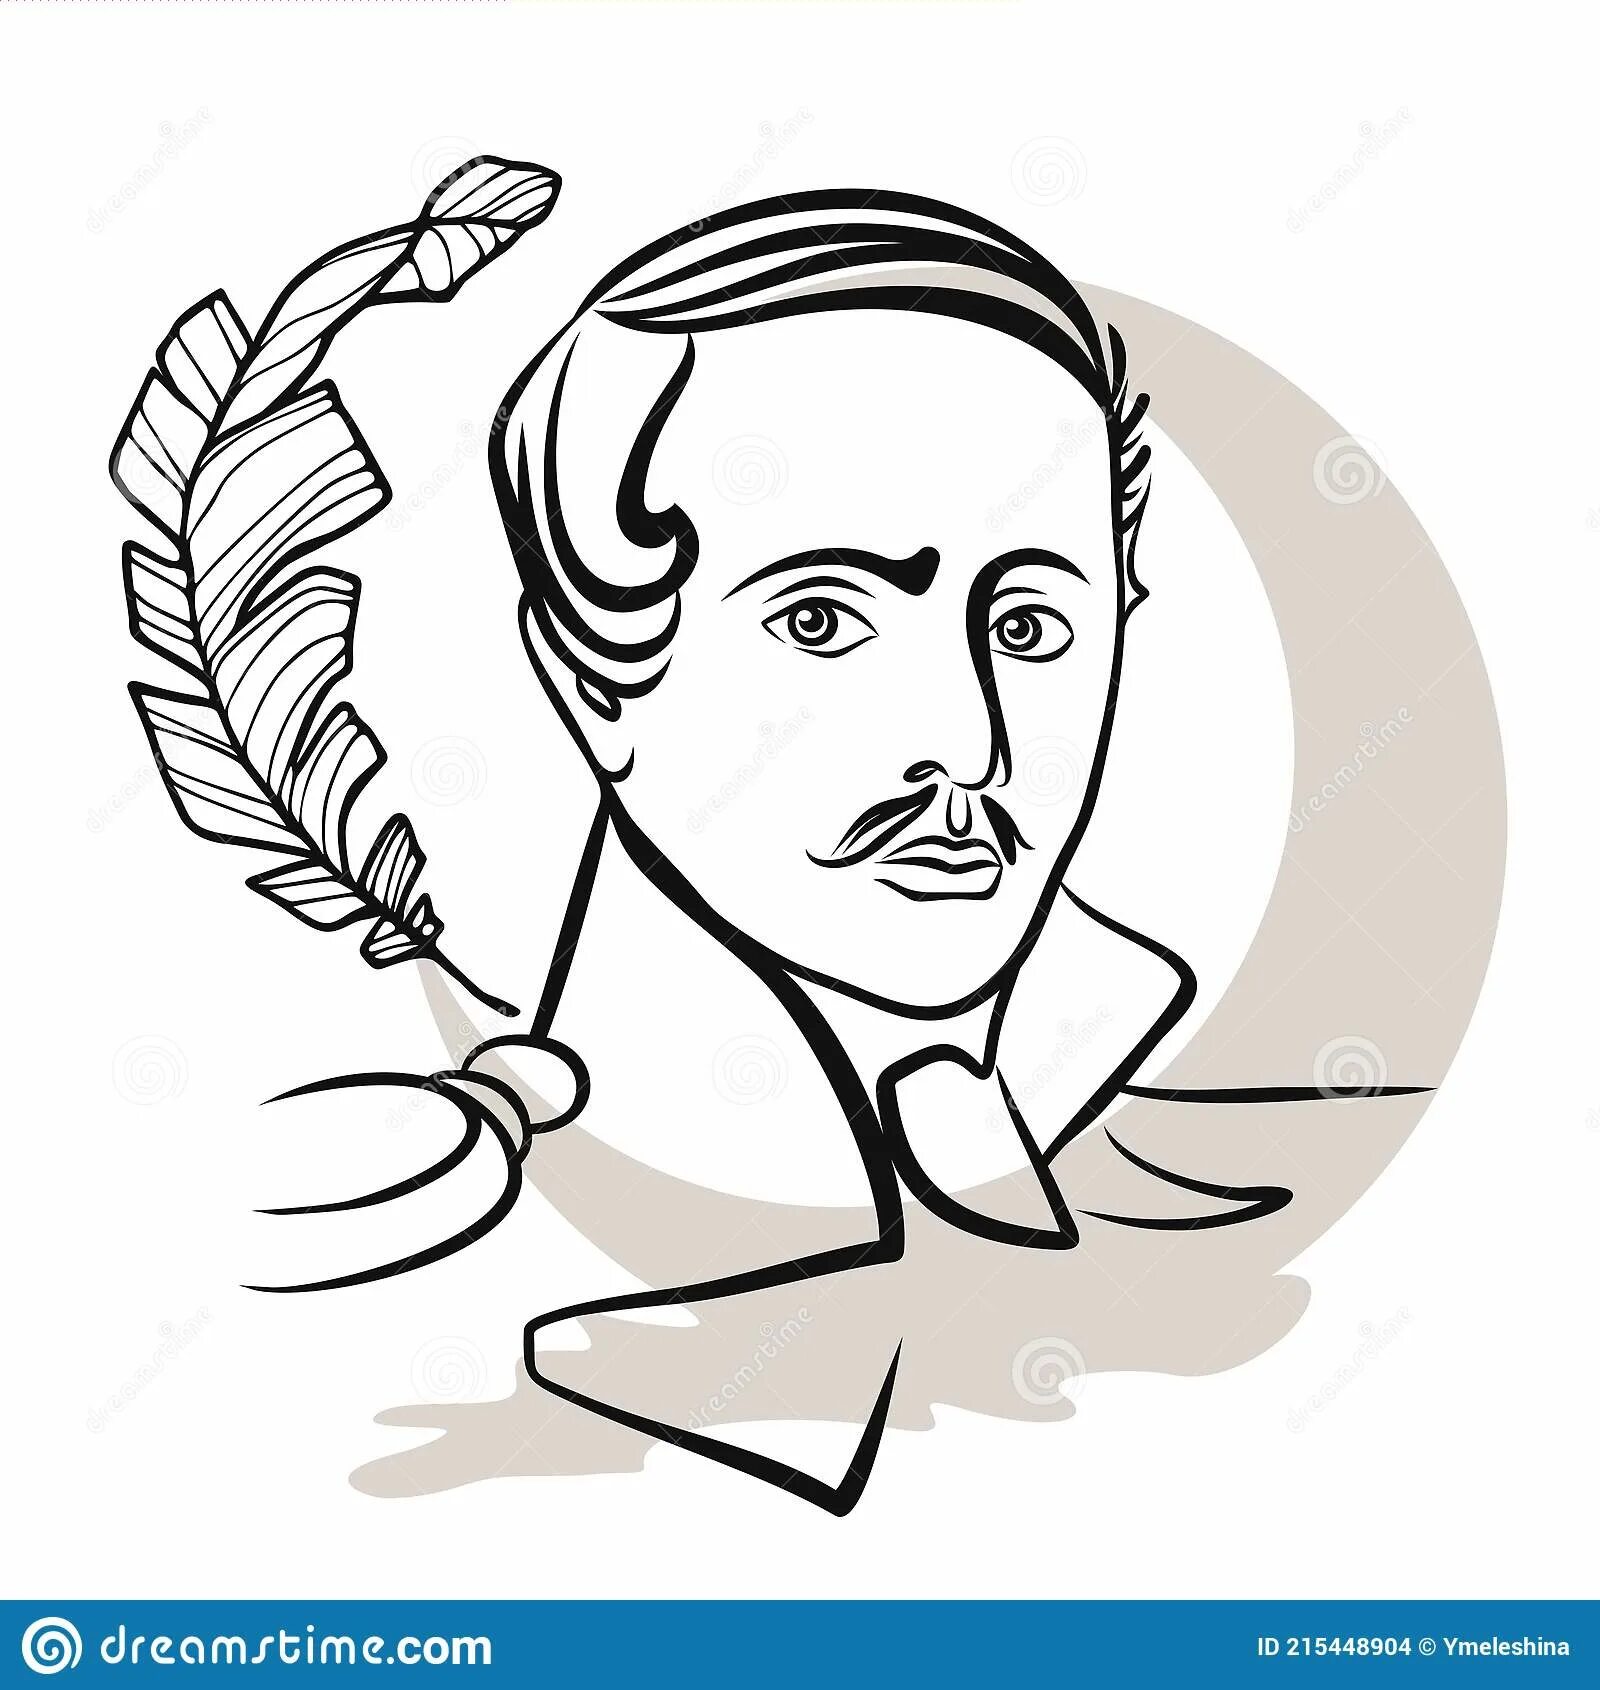 Lermontov filled with paints coloring